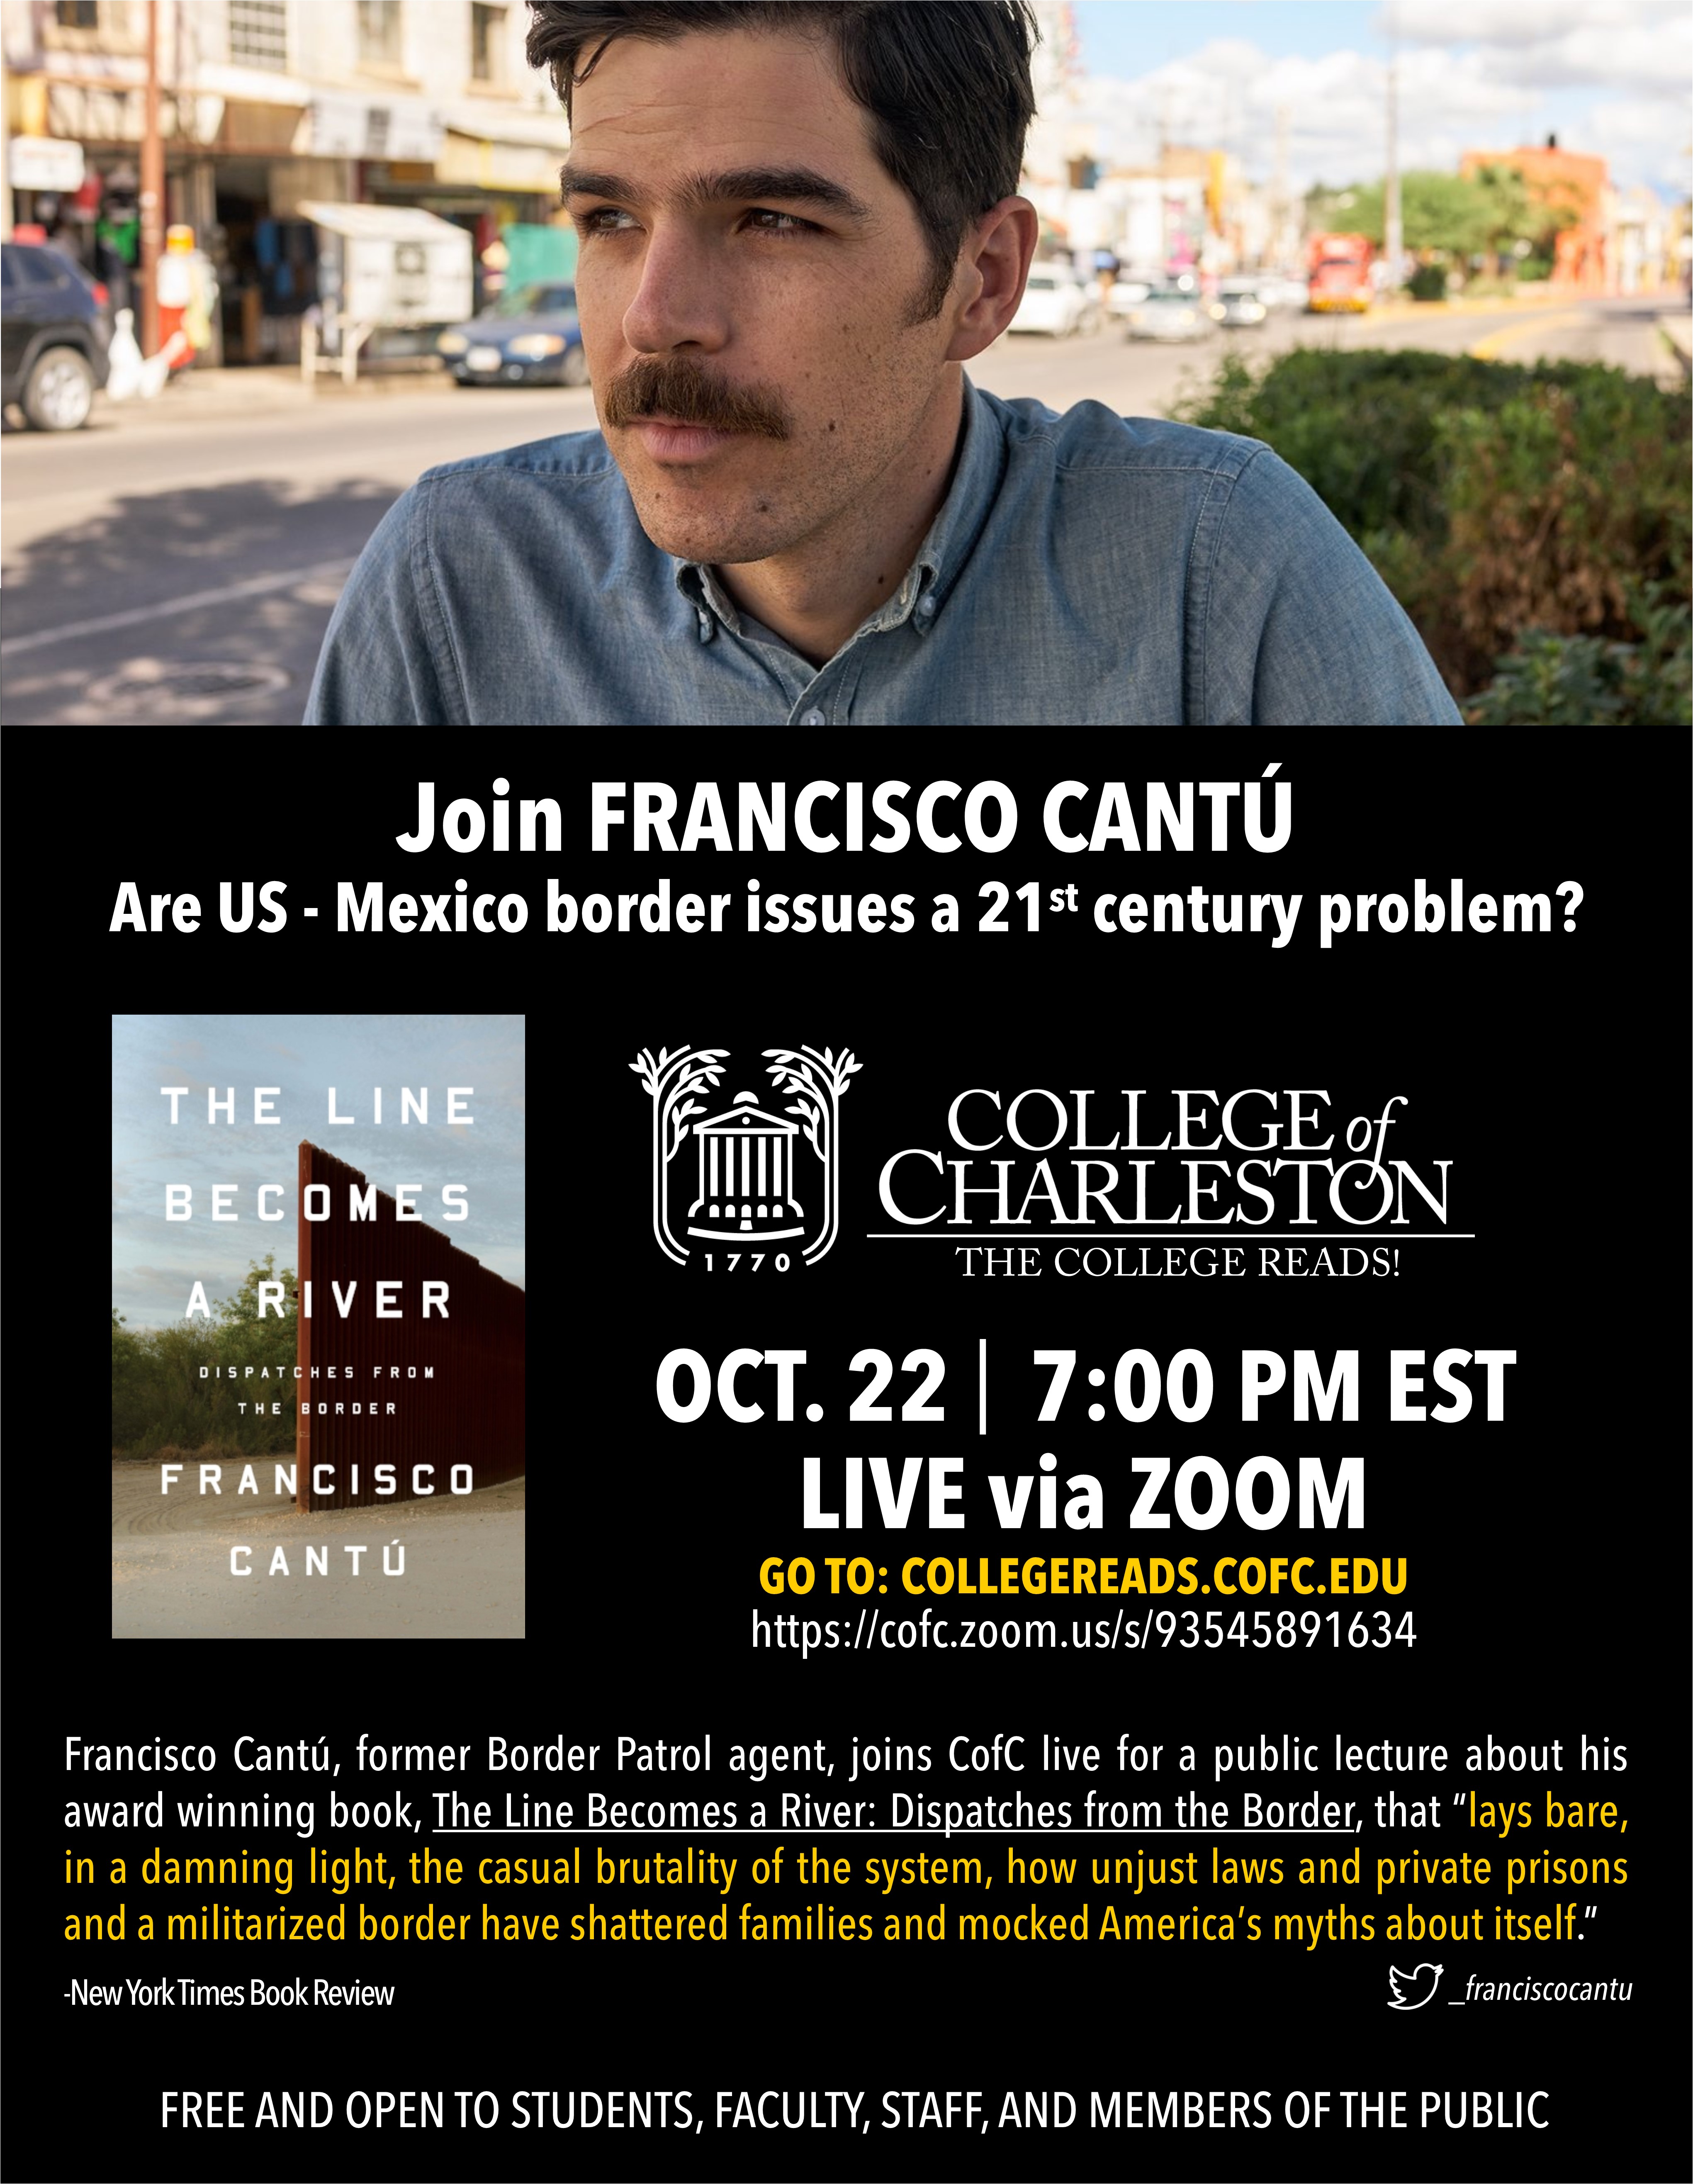 The College Reads! Program Oct 22 at 7pm online event